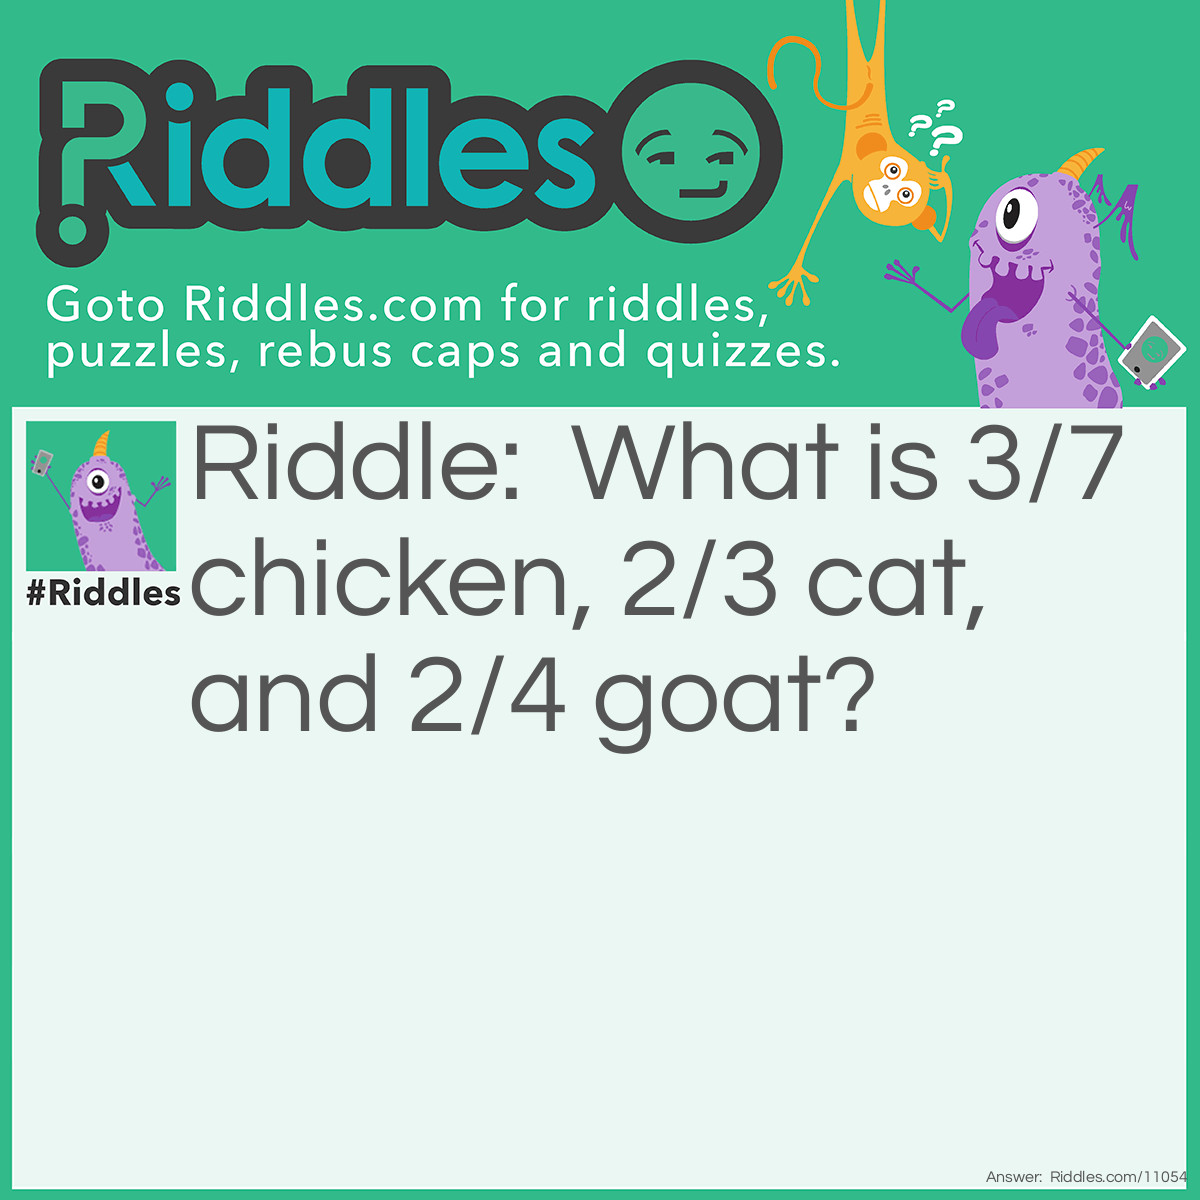 Riddle: What is 3/7 chicken, 2/3 cat, and 2/4 goat? Answer: Chicago! Chicken is 7 letters and you use "CHI" Cat is 3 letters and you use "CA" Goat is 4 letters and you use the "GO"